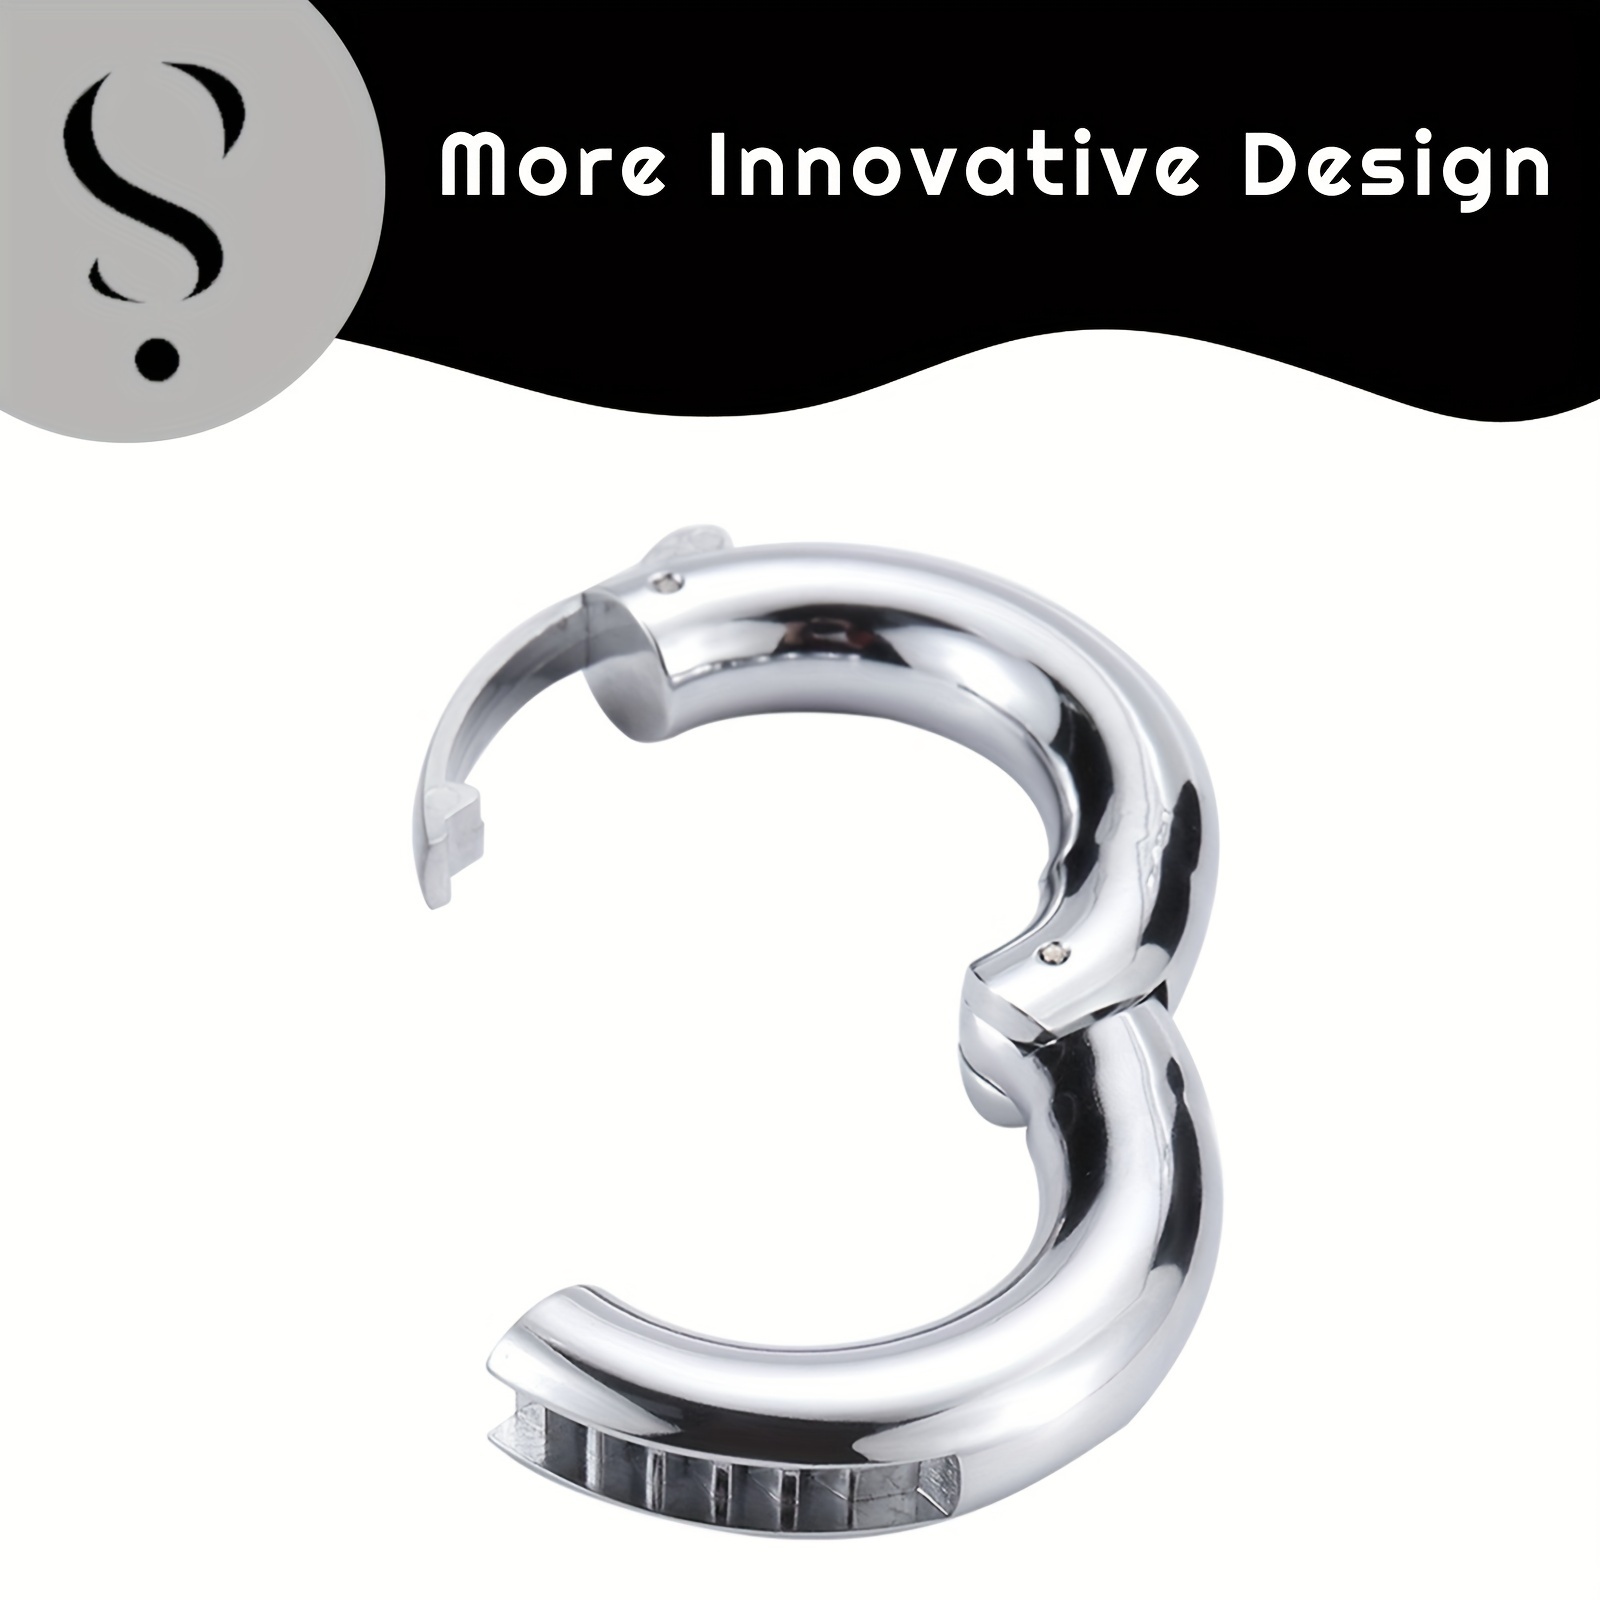 Stainless Steel Glans Ring,Men Cock Ring,Penis Jewelry,Male Penis Stretching